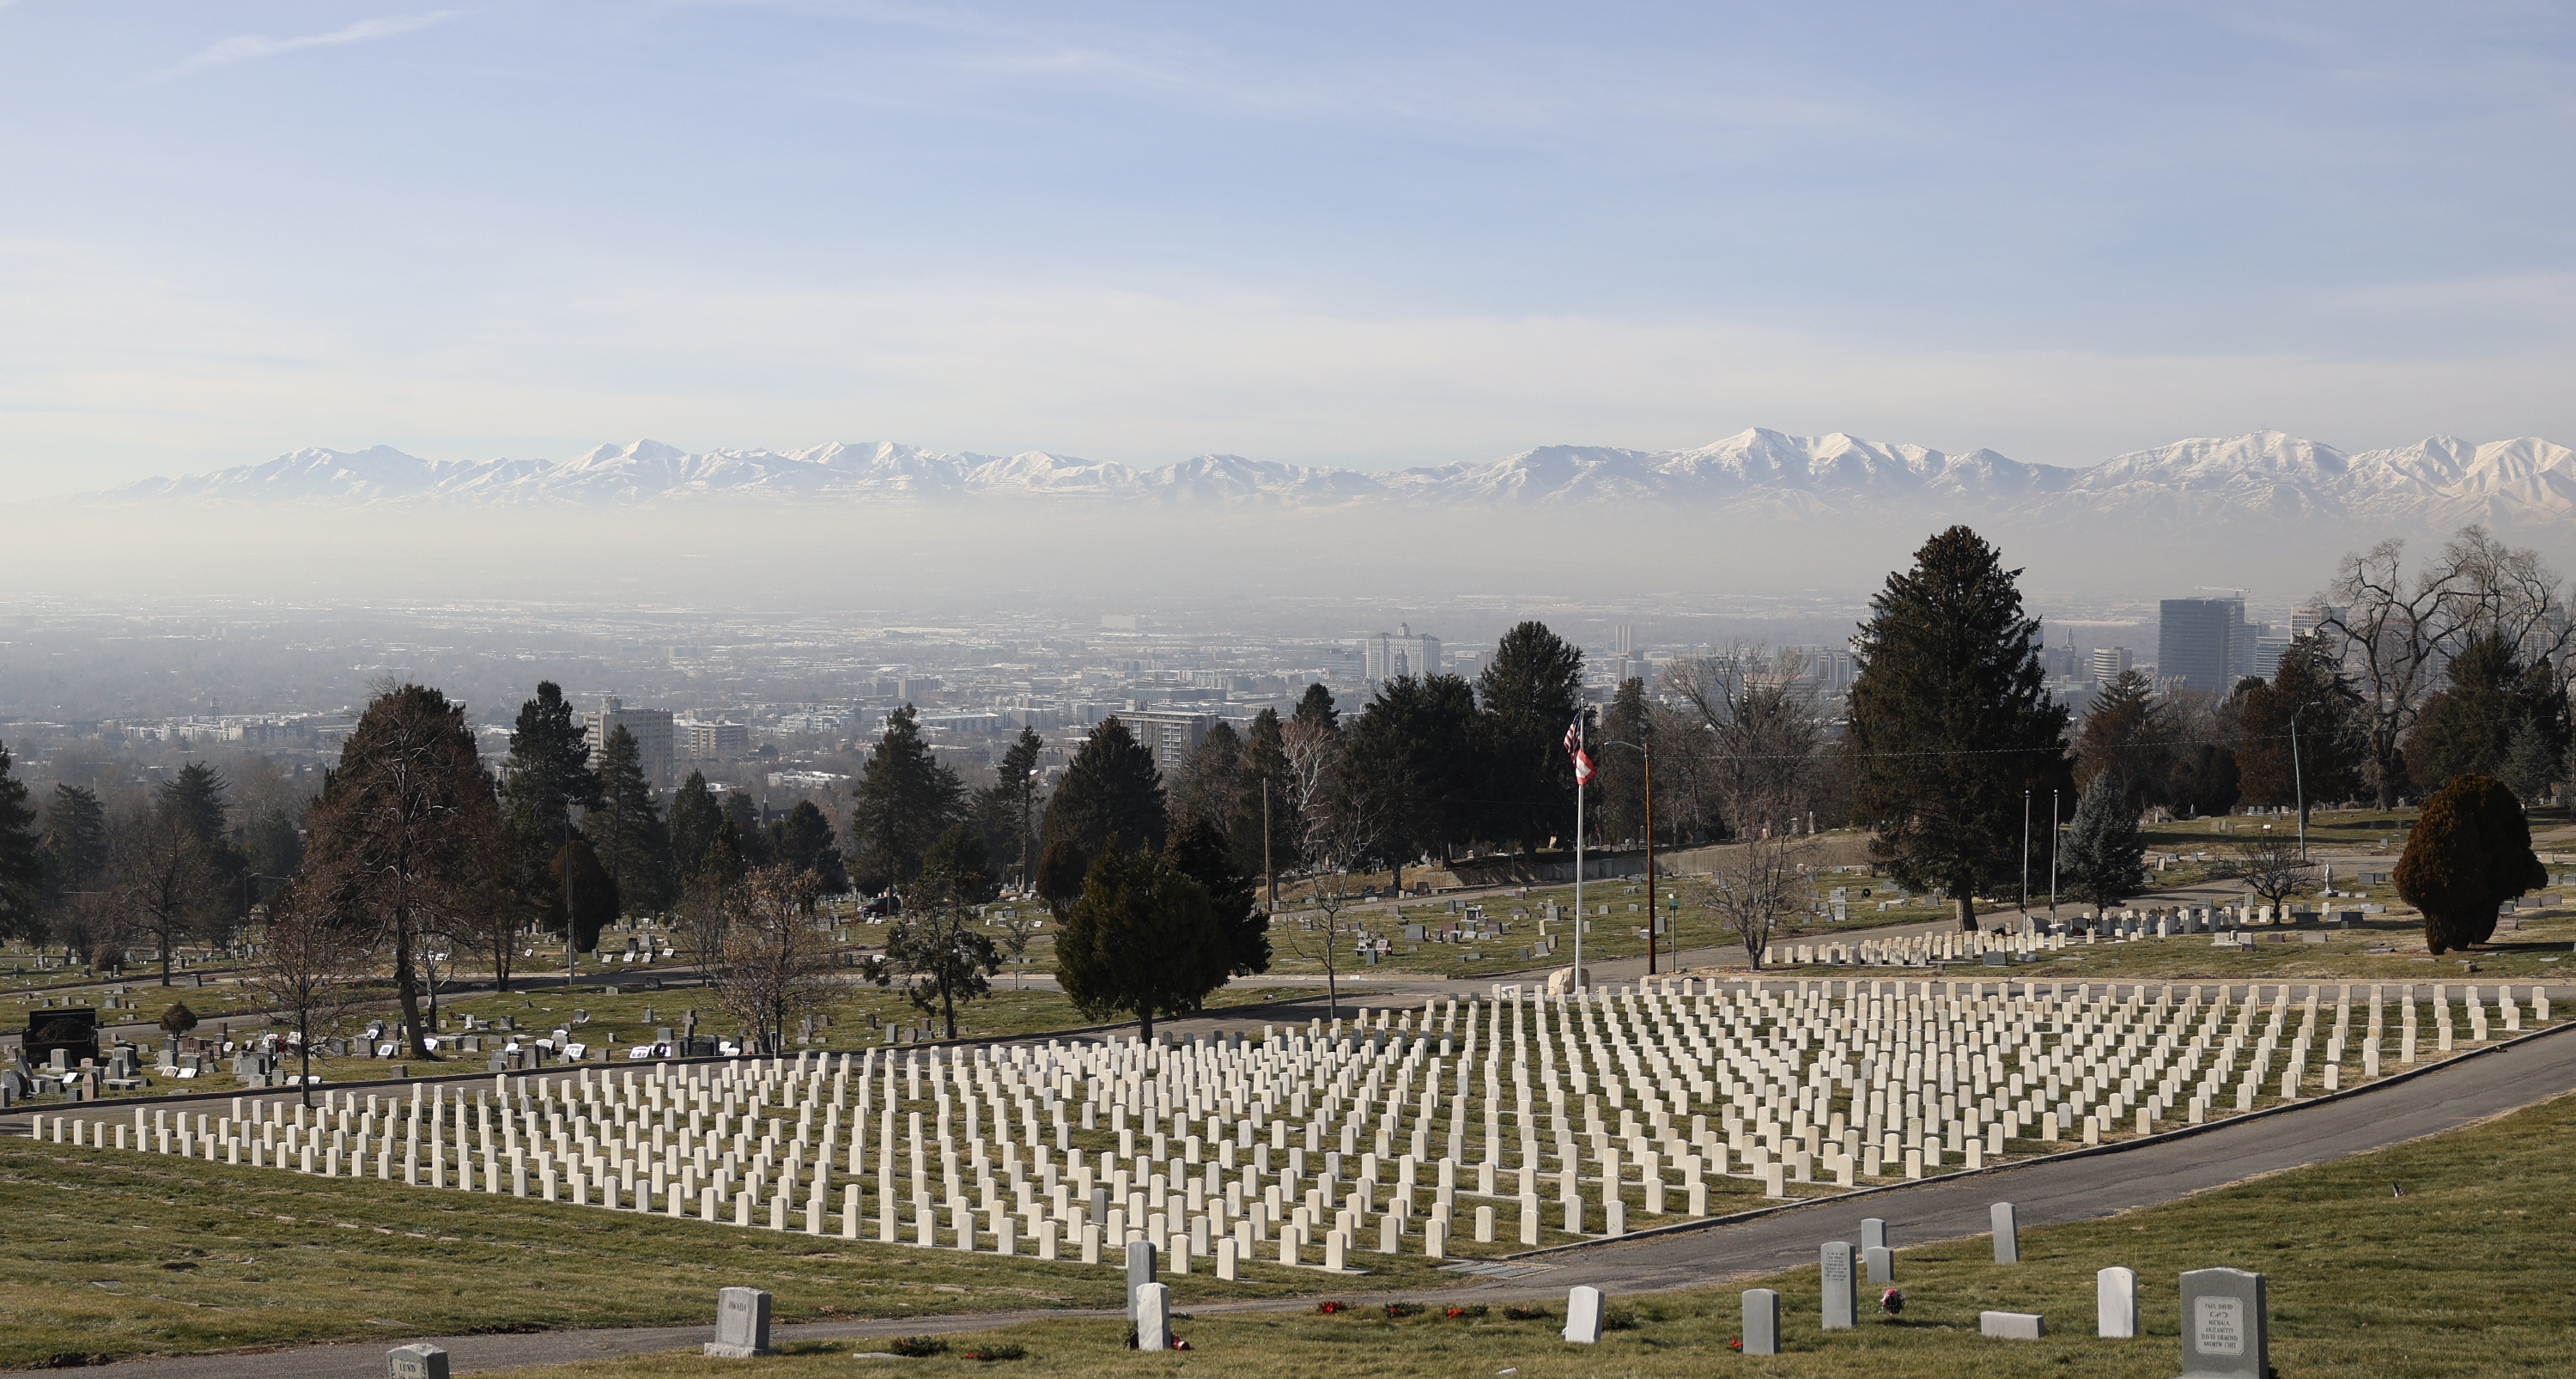 Smog settles over the Salt Lake Valley during an inversion as seen from the Salt Lake City Cemetery in Salt Lake City on Wednesday, Jan. 12, 2022. HB109, sponsored by Rep. Steve Handy, R-Layton, would allow physicians to indicate that poor air quality contributed to an individual’s death on the death certificate.